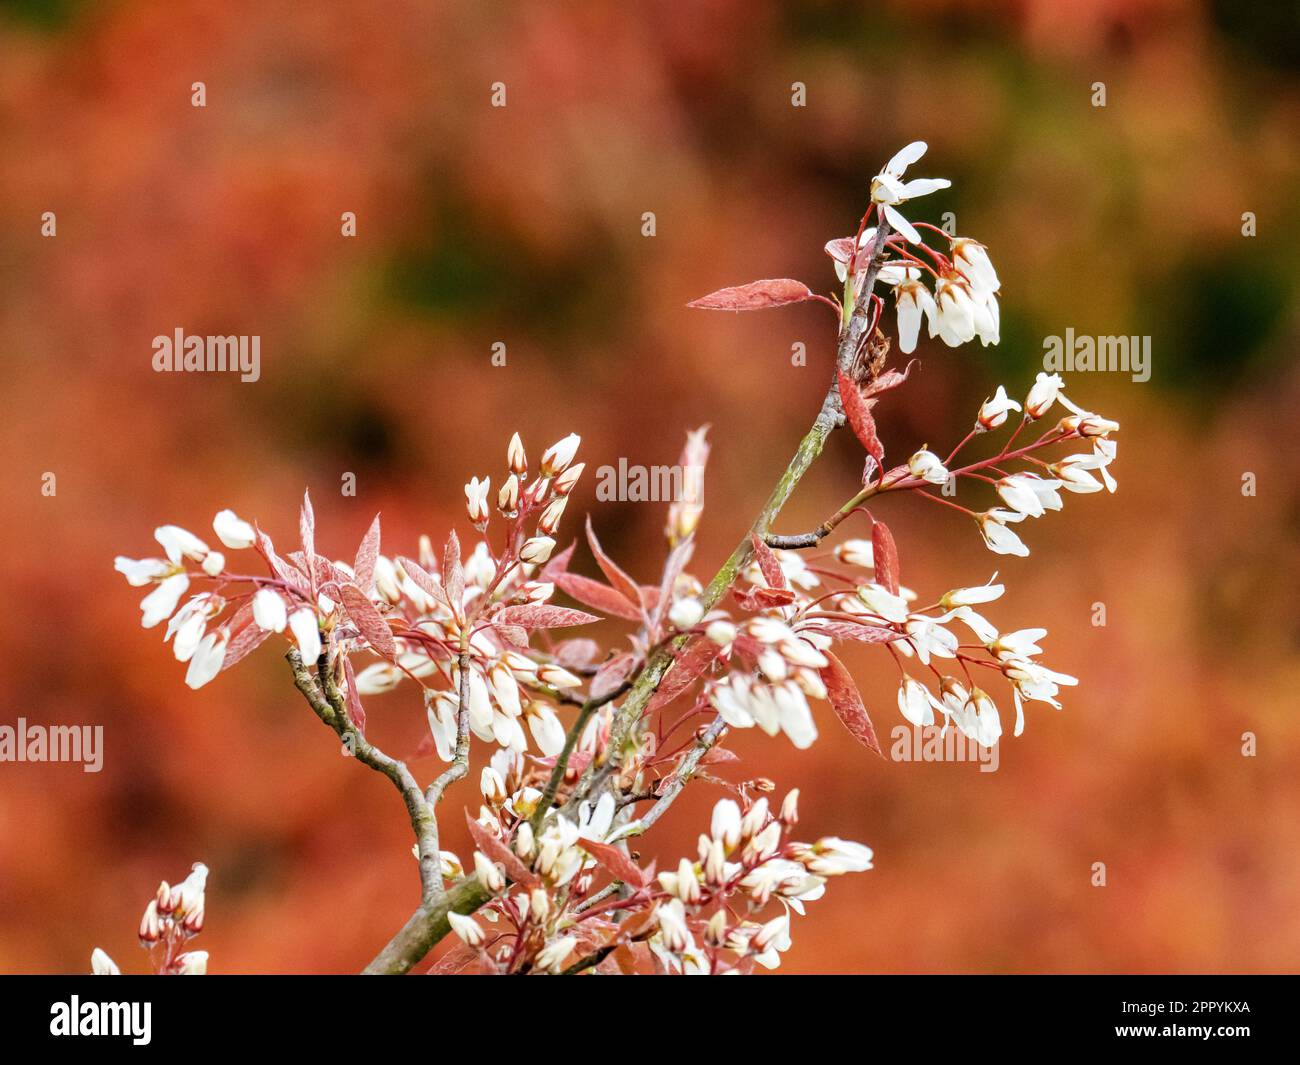 Amelanchier blossom on a tree in a garden in Ambleside, Lake District, UK. Stock Photo